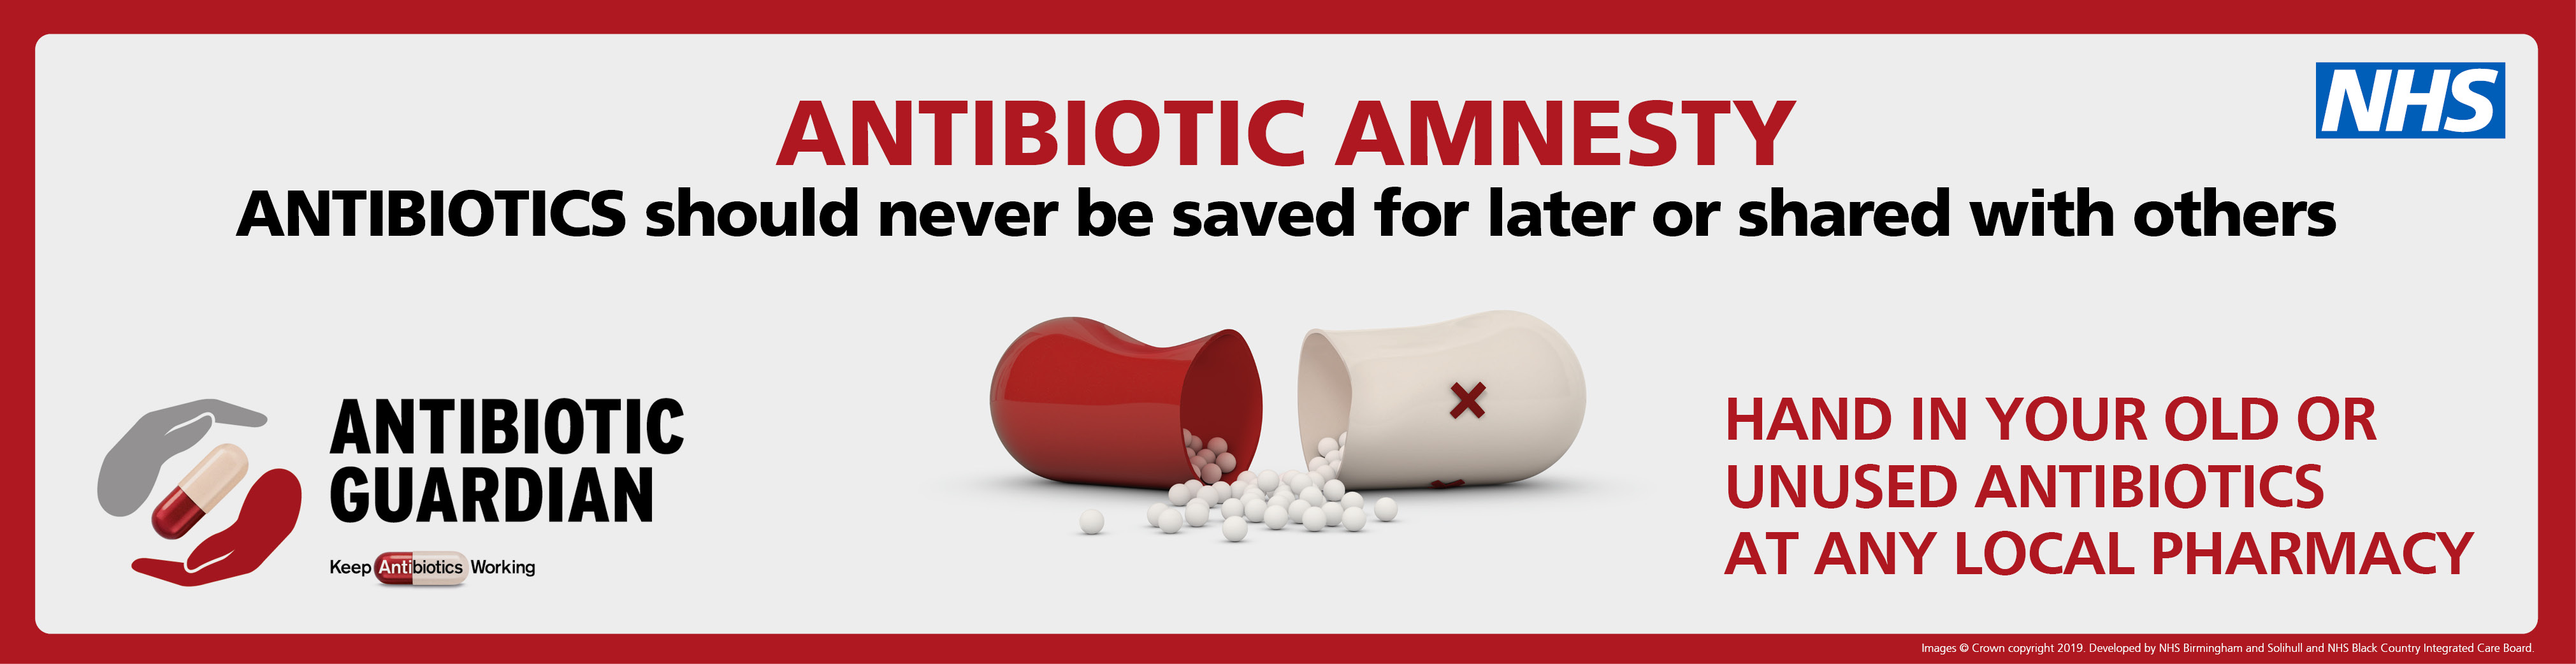 Antibiotic amnesty. Antibiotics should never be saved for later or shared with others